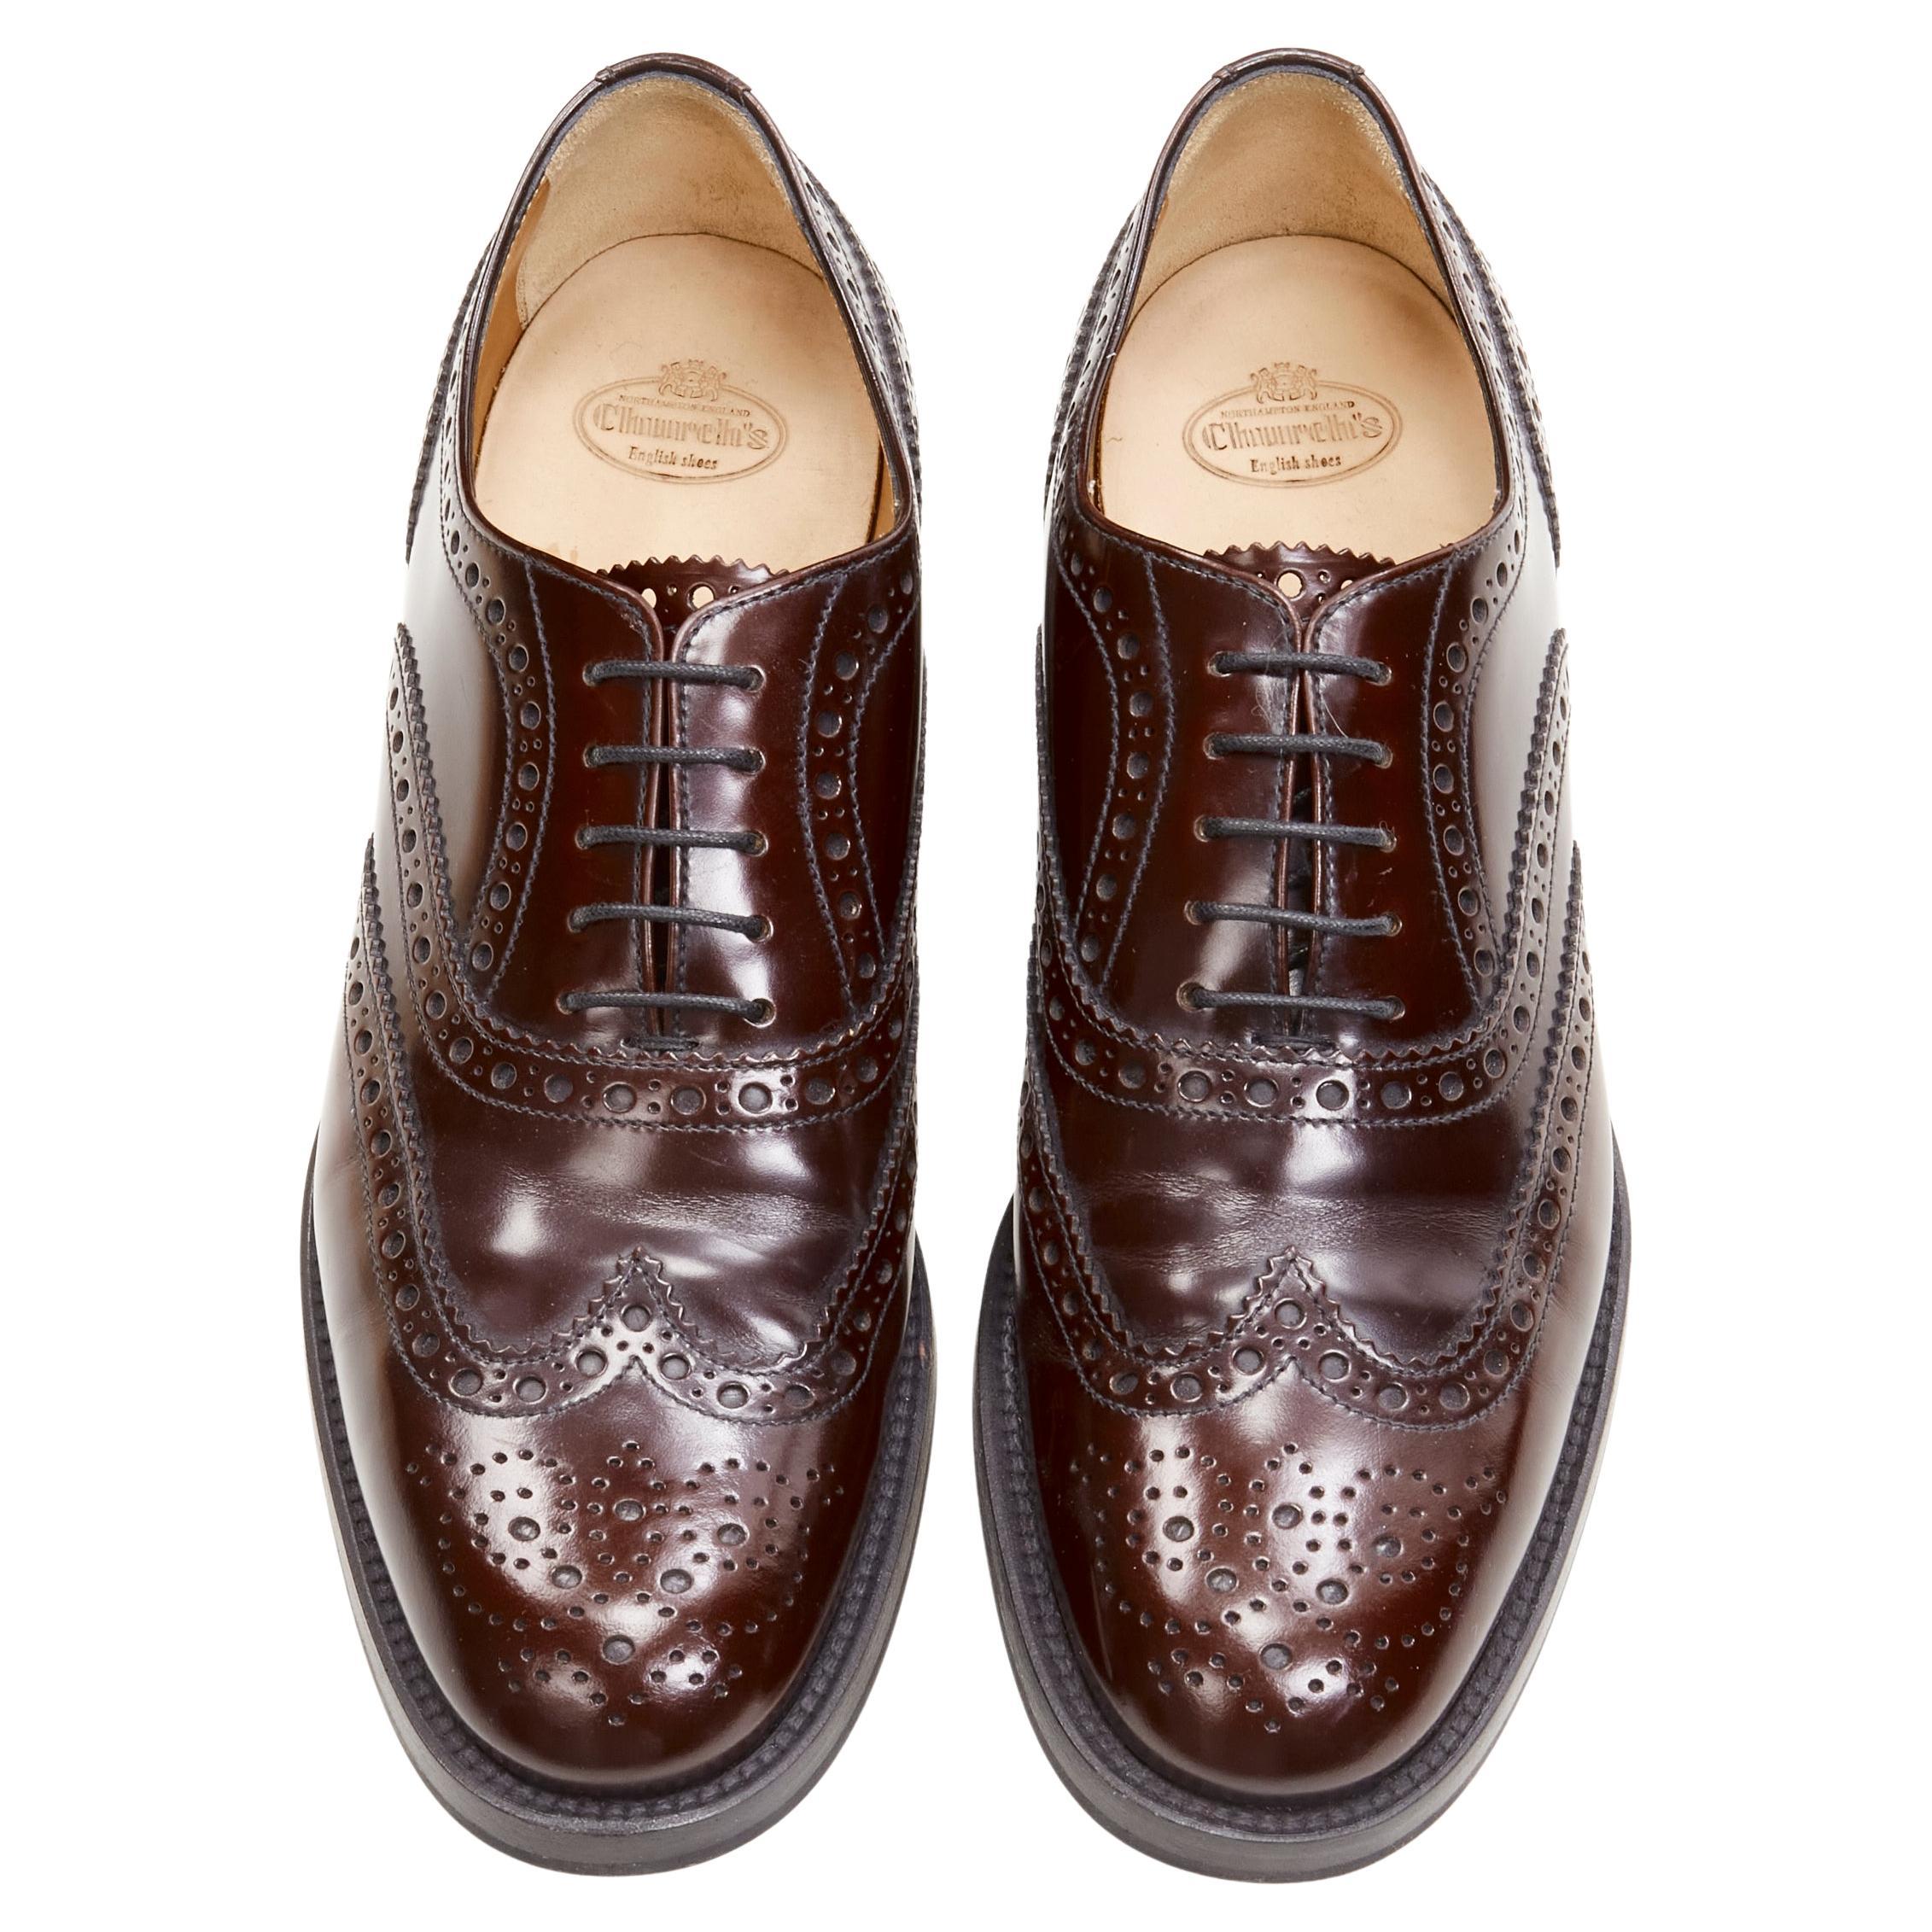 CHURCH'S Bess burgundy red perforated polished leather oxford loafer EU38
Brand: Church's
Model: Bess
Material: Leather
Color: Burgundy
Pattern: Solid
Closure: Lace Up
Extra Detail: BESS style.
Made in: Italy

CONDITION:
Condition: Excellent, this